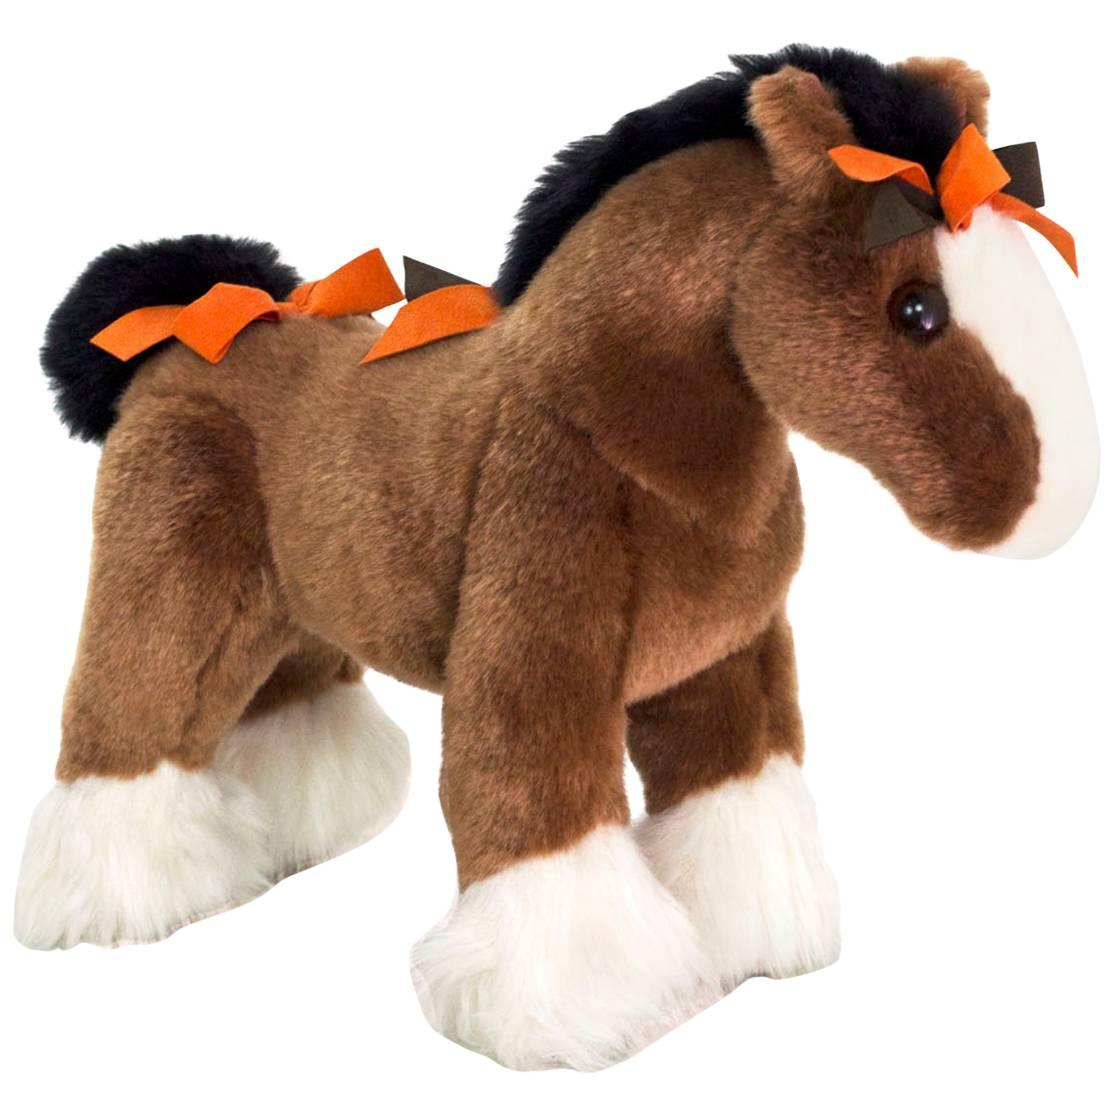 Hermes Hermy The Horse Small Brown Plush Toy Stuffed Animal 